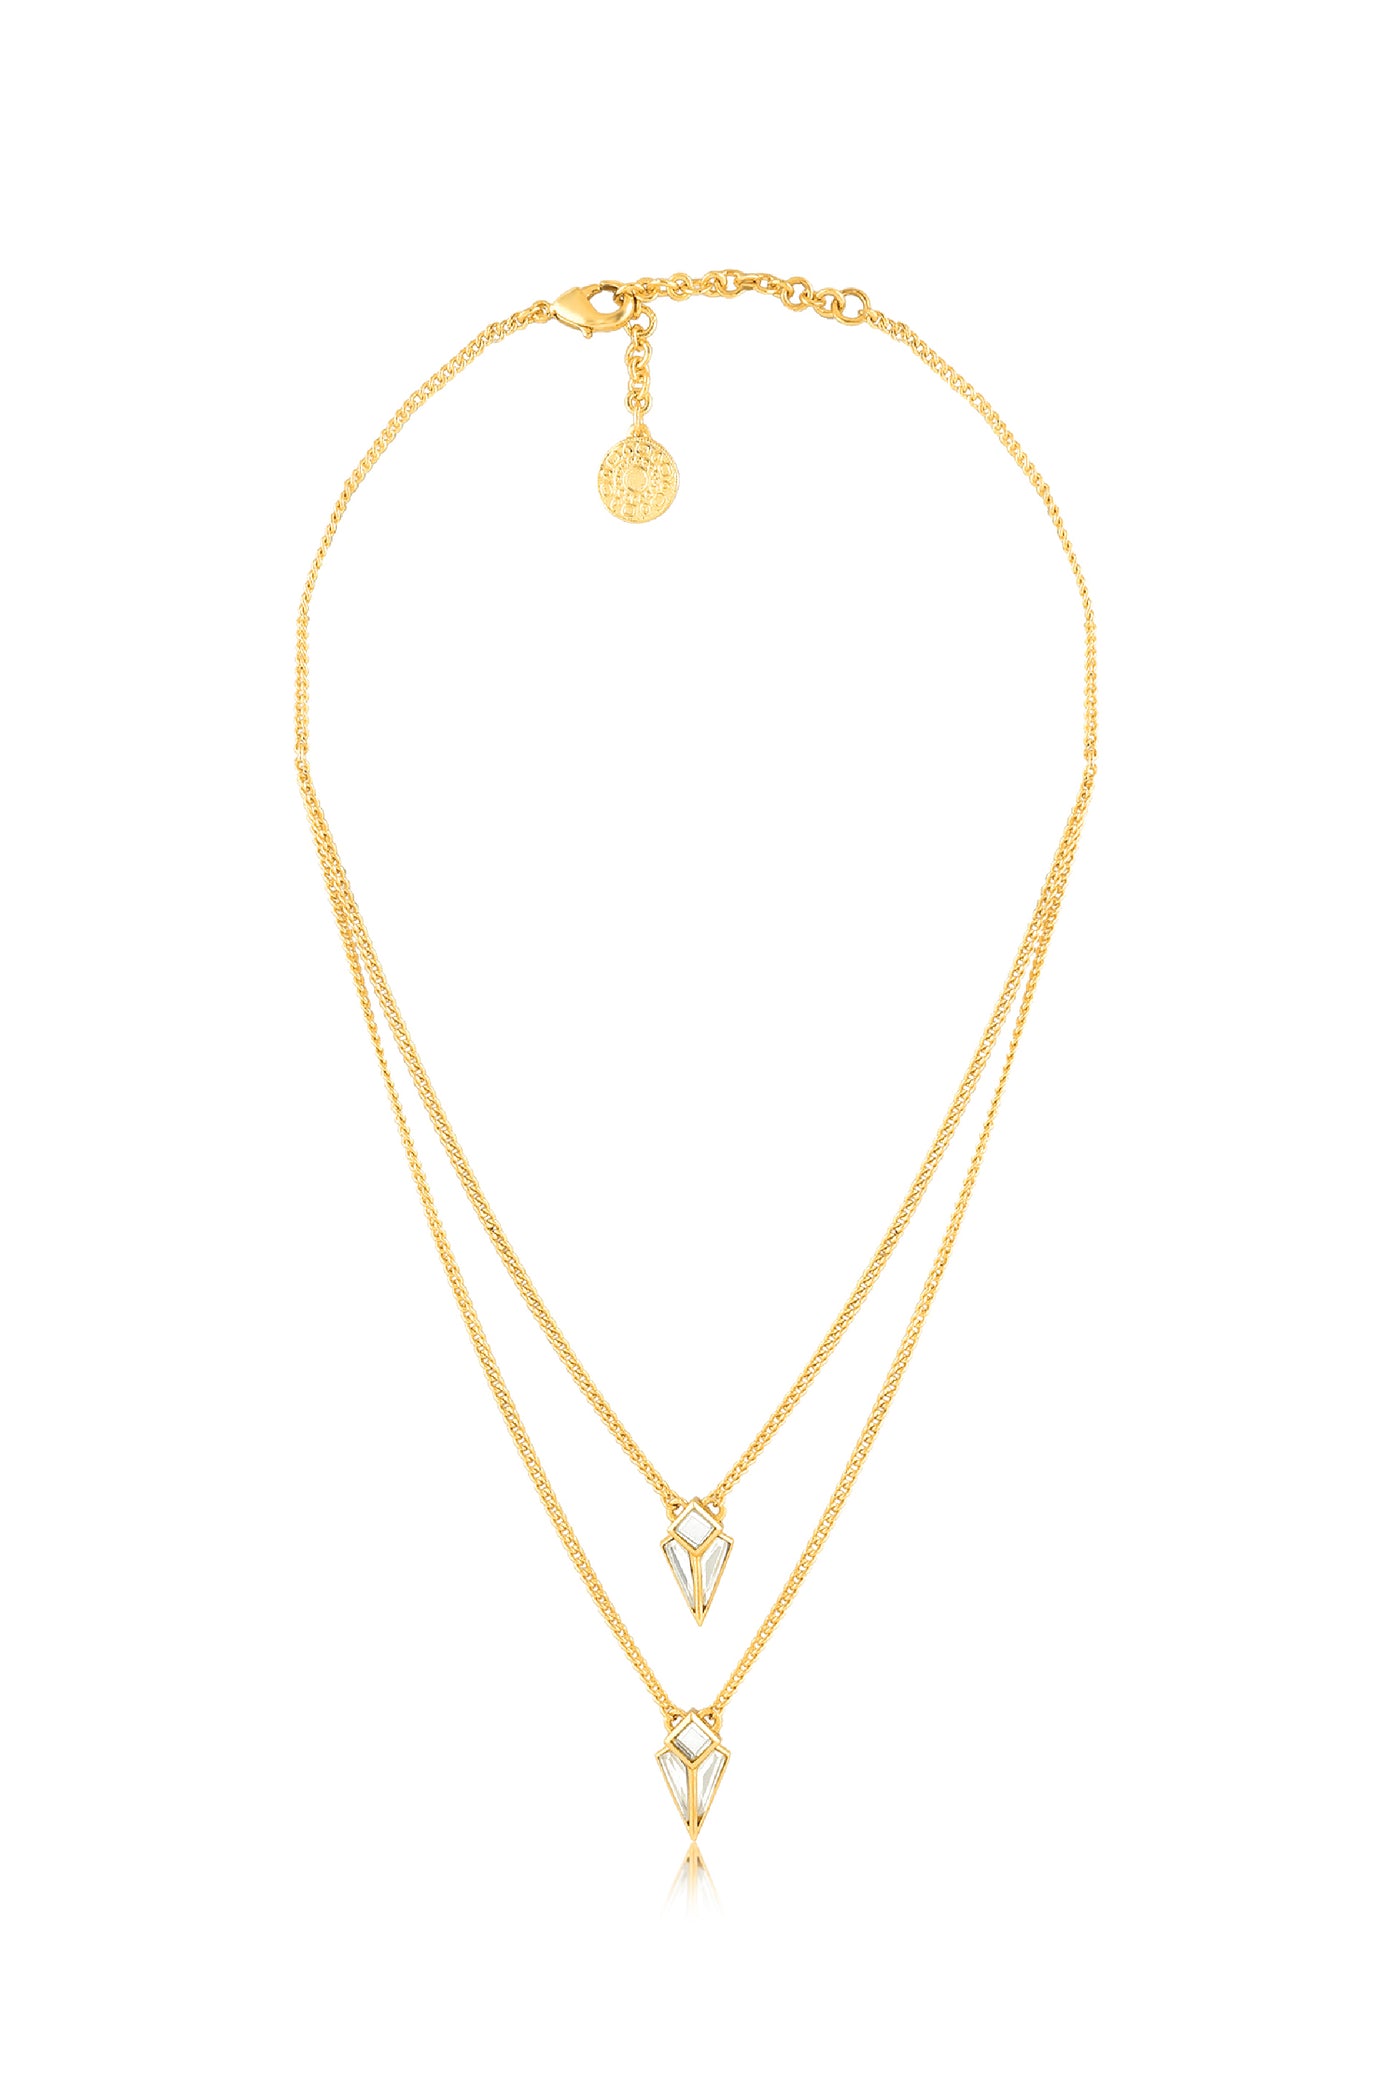 Isharya Essential Mirror Pearl Duo Necklace In 18Kt Gold Plated indian designer wear online shopping melange singapore